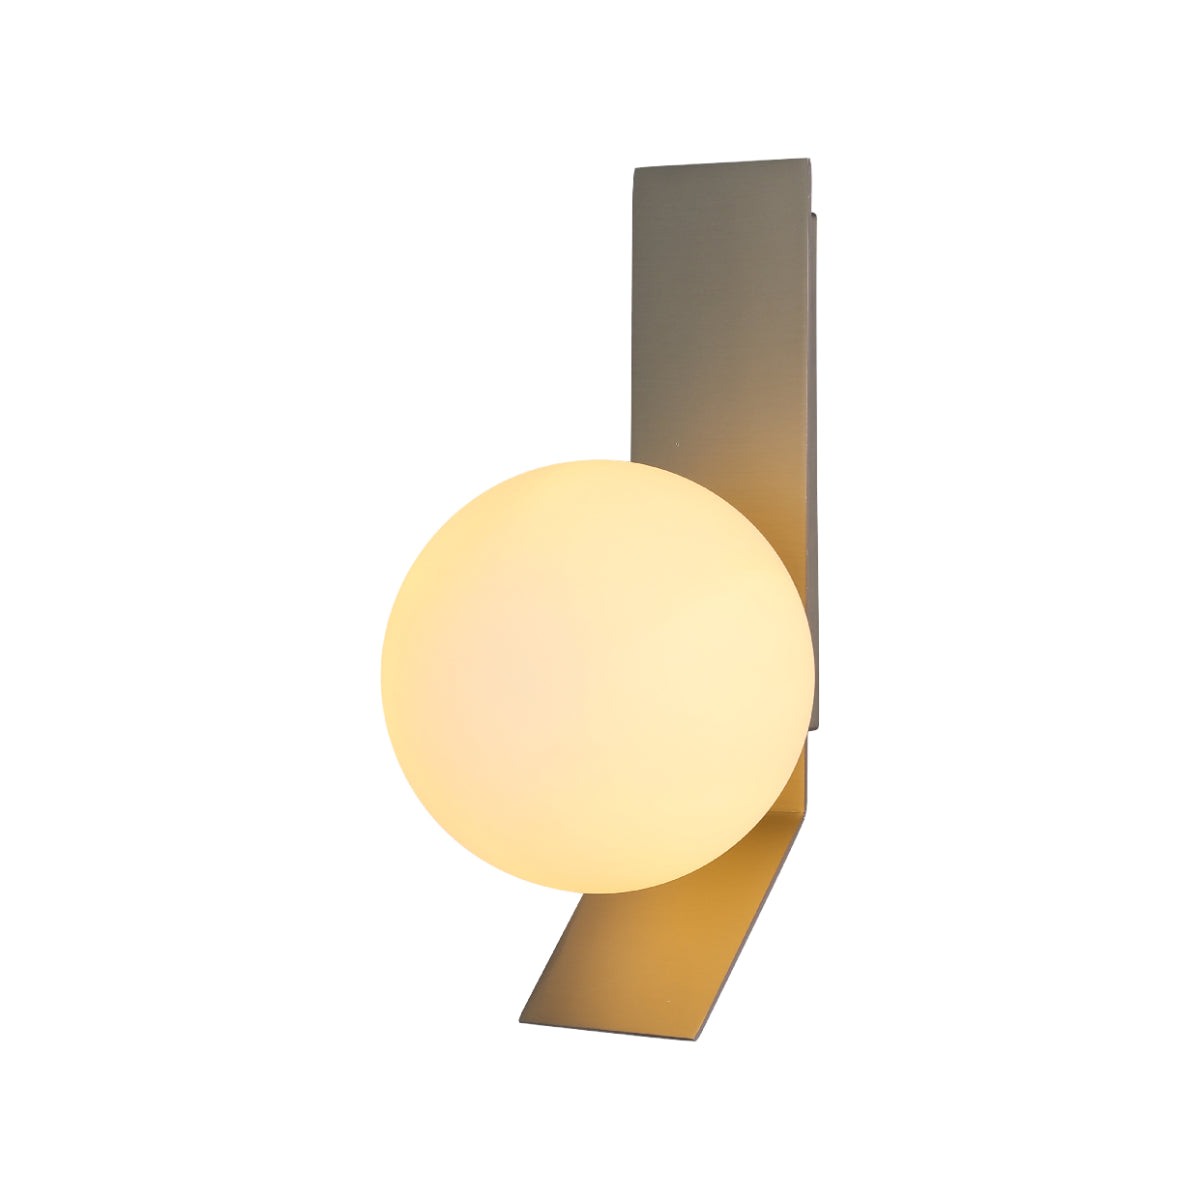 Main image of Contemporary Adjustable Globe Wall Sconce Light 151-19968